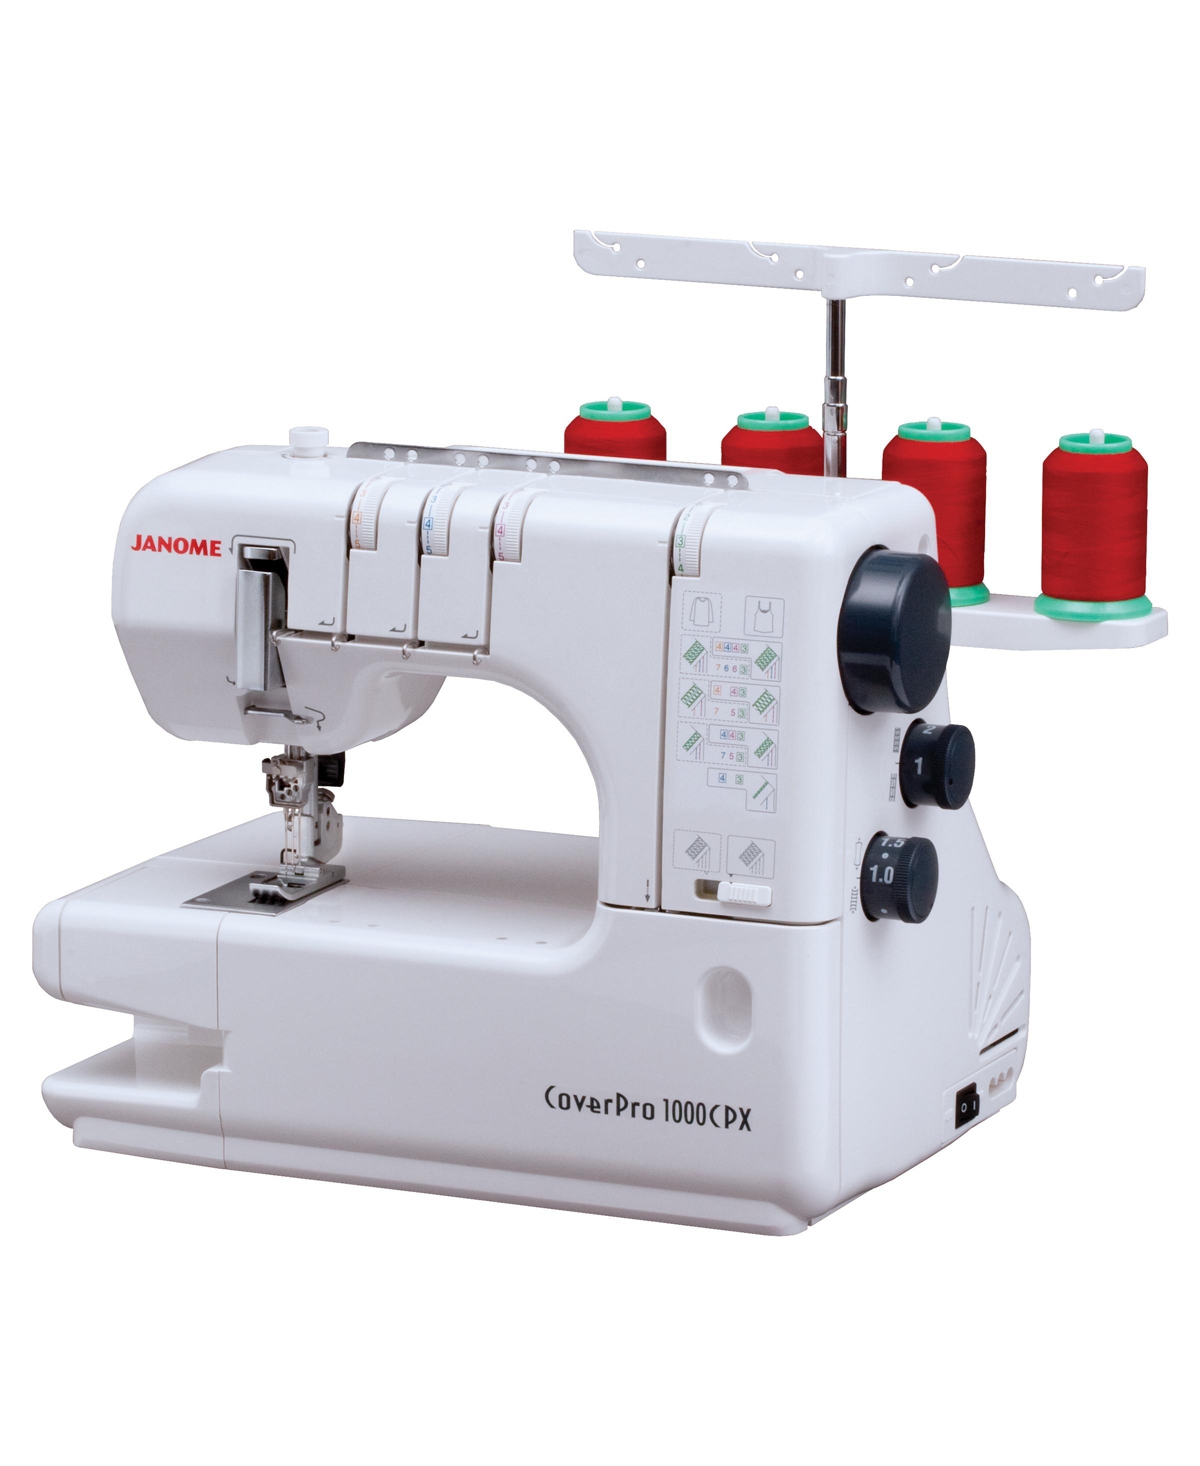 1000CPX Cover Pro Coverstitch Mechanical Sewing Machine - White